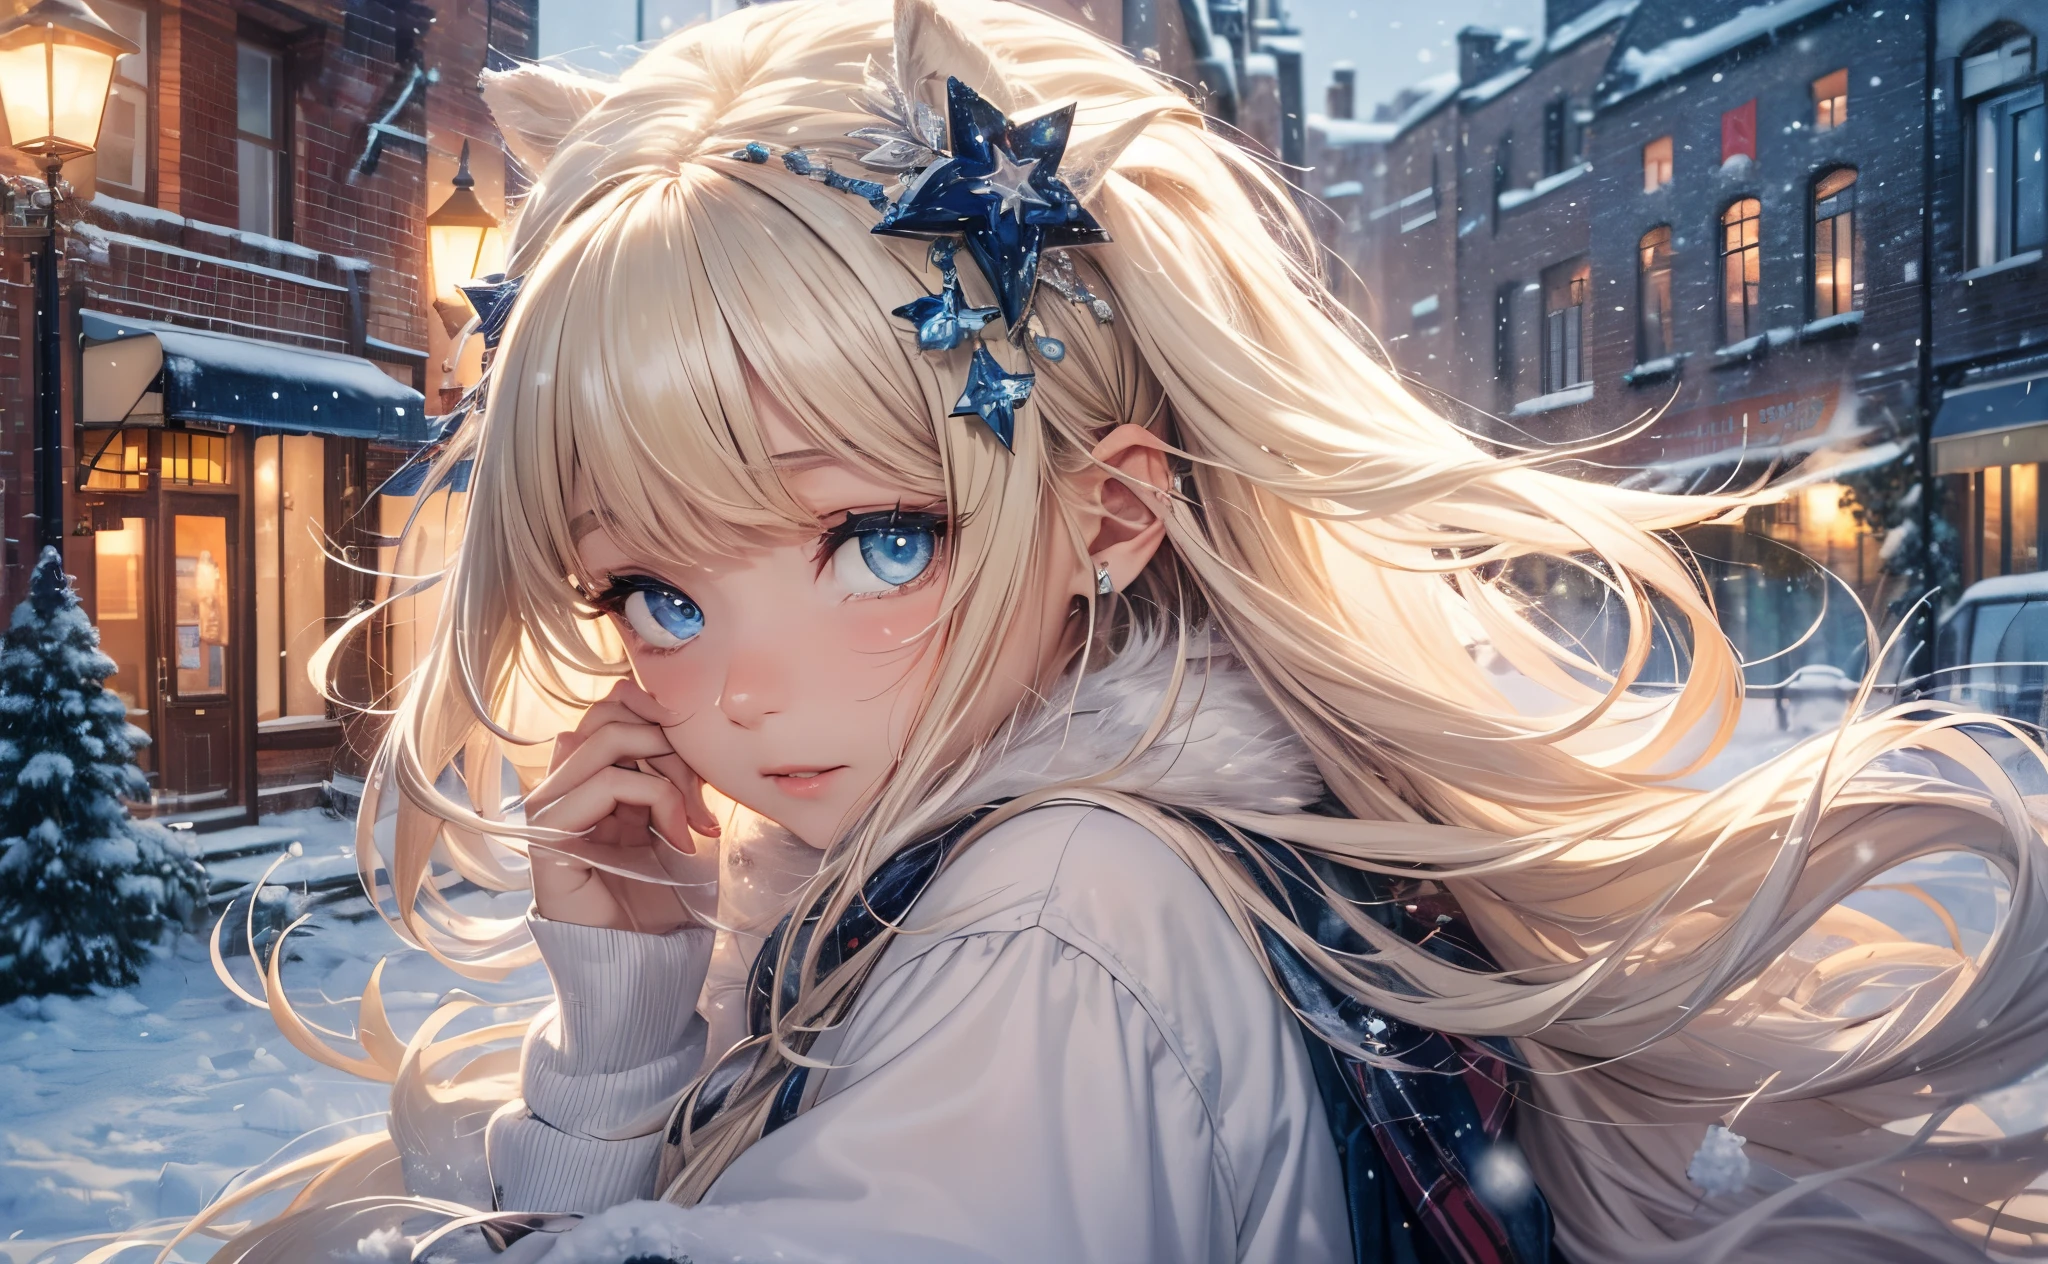 (​masterpiece),(top-quality:1.2),1girl in,(masuter piece:1.3),exquisitedetails, Highest quality 8K resolution, Ultra-detailed, Realistic, Vibrant colors, Soft tones, With warm and gentle lighting, (snowy night:1.5),(Snowy city:1.4),sexy wide skirt,Sexy style,Dynamic angles, Sexy hats、sexy earmuffs、Sexy coat,starry sky and shooting stars,Crying and laughter,(Smooth straight blonde hair:1.2),(Hair parted in the middle:1.3),(Glowing hair),(Dark blue eyes:1.3),White skin, hair clips,Small necklace,A gentle feeling overflows,joy and pure love, warm glow,happiness and laughter,Vibrant colors,inspiring style,depth of love,color palettes,dreamy ambiance,masterpiece artwork